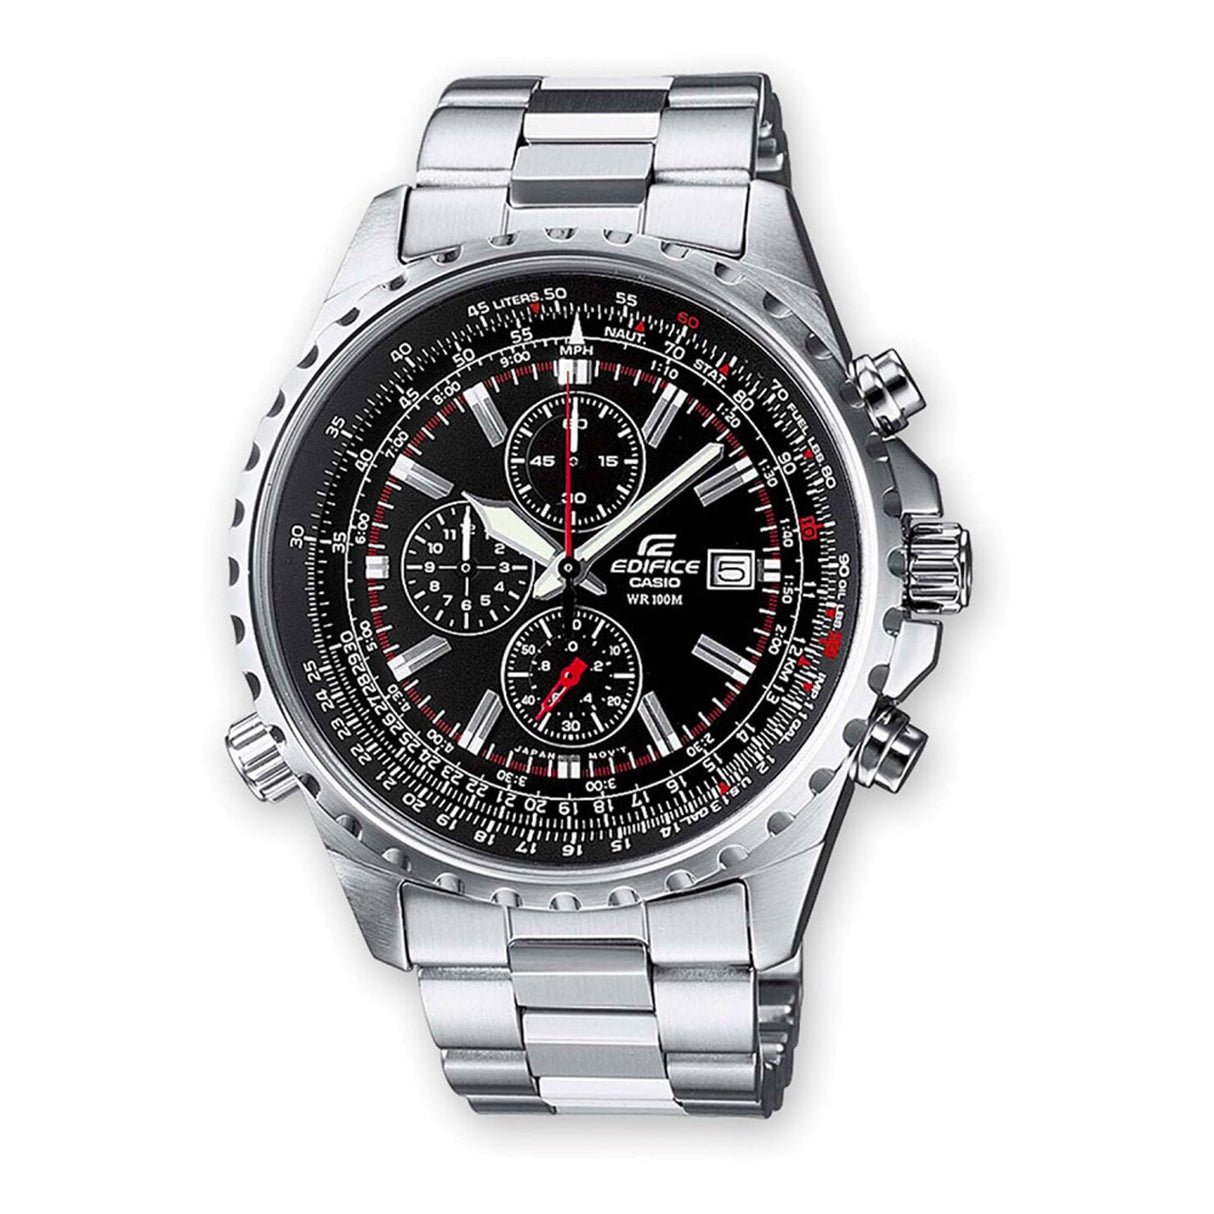 Casio Edifice Chronograph Stainless Steel Case & Bracelet Silver Grey Finish 45mm Case Size Quartz Movement Chronograph Functionality Date Display Sapphire Crystal (Optional - If featured) Water Resistant (Optional - If featured) Blue Dial Casual Style Sophisticated Design Original Packaging